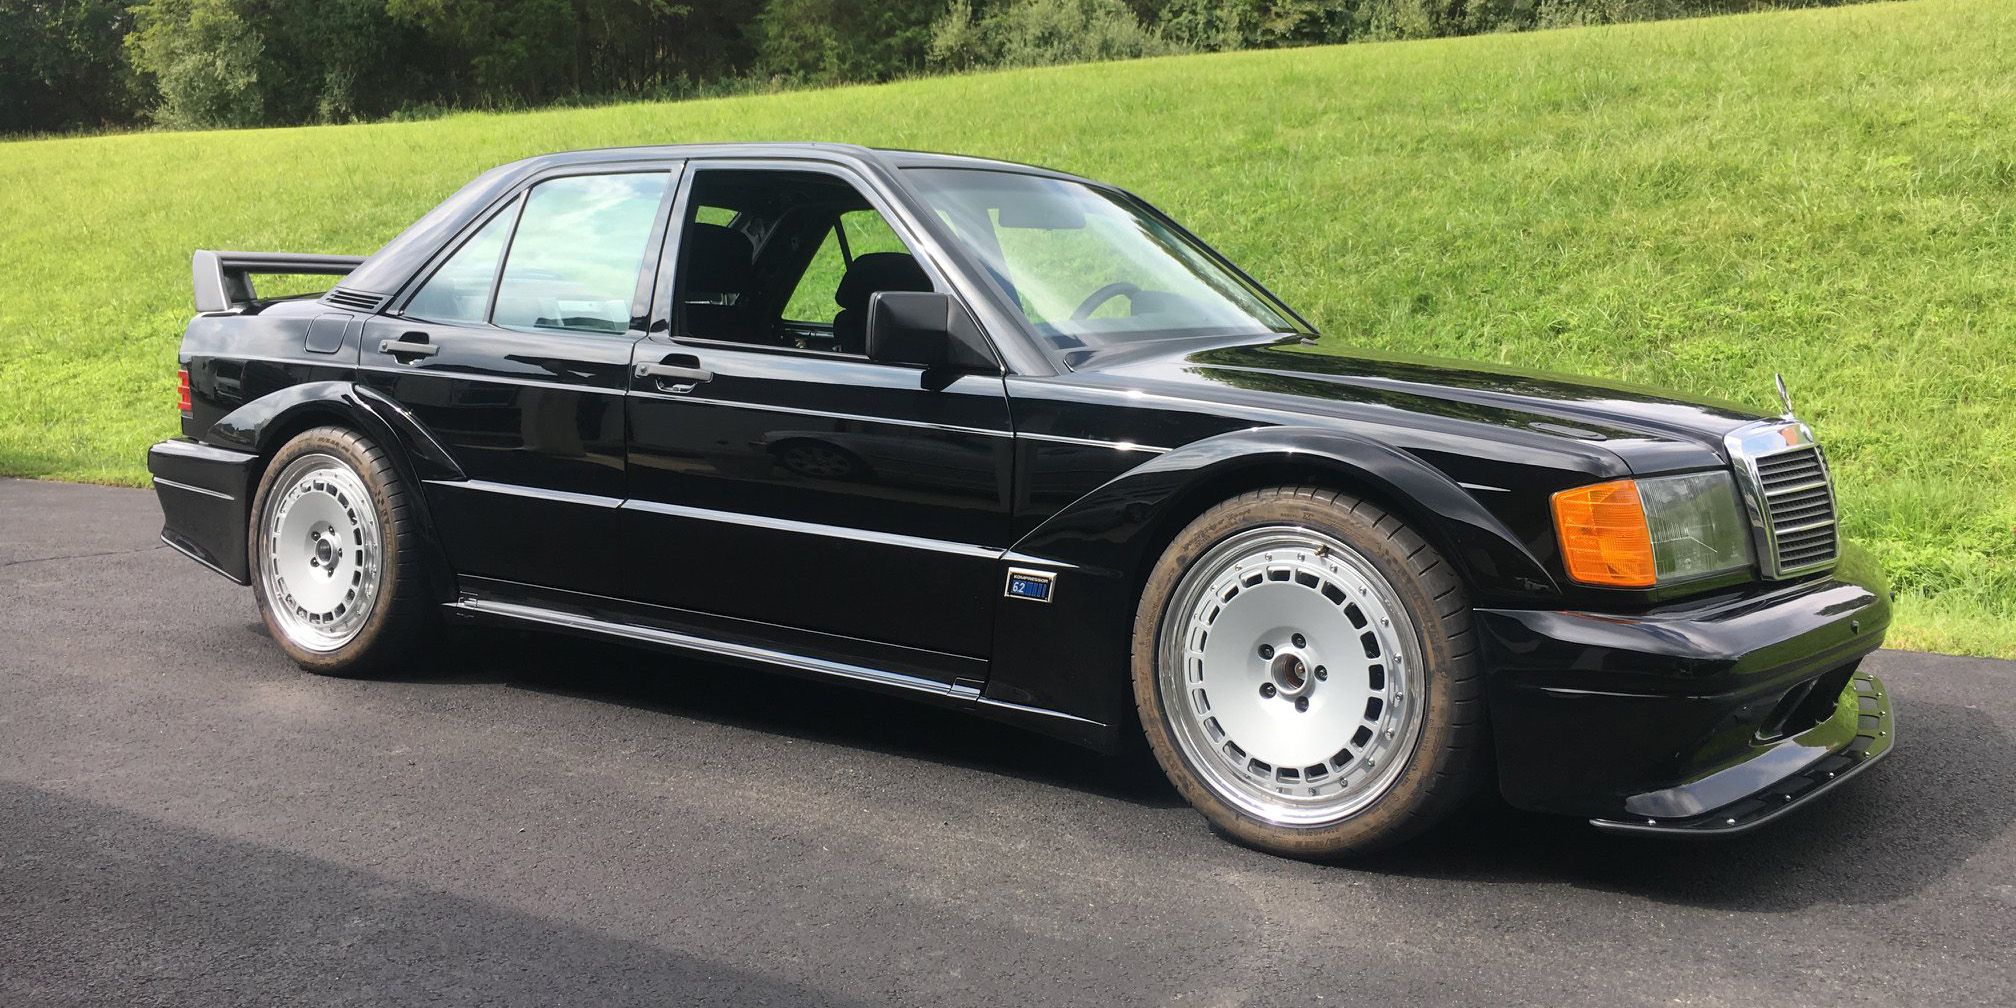 this 1985 mercedes benz 190e is a 2010 c63 amg 1985 mercedes benz 190e is a 2010 c63 amg